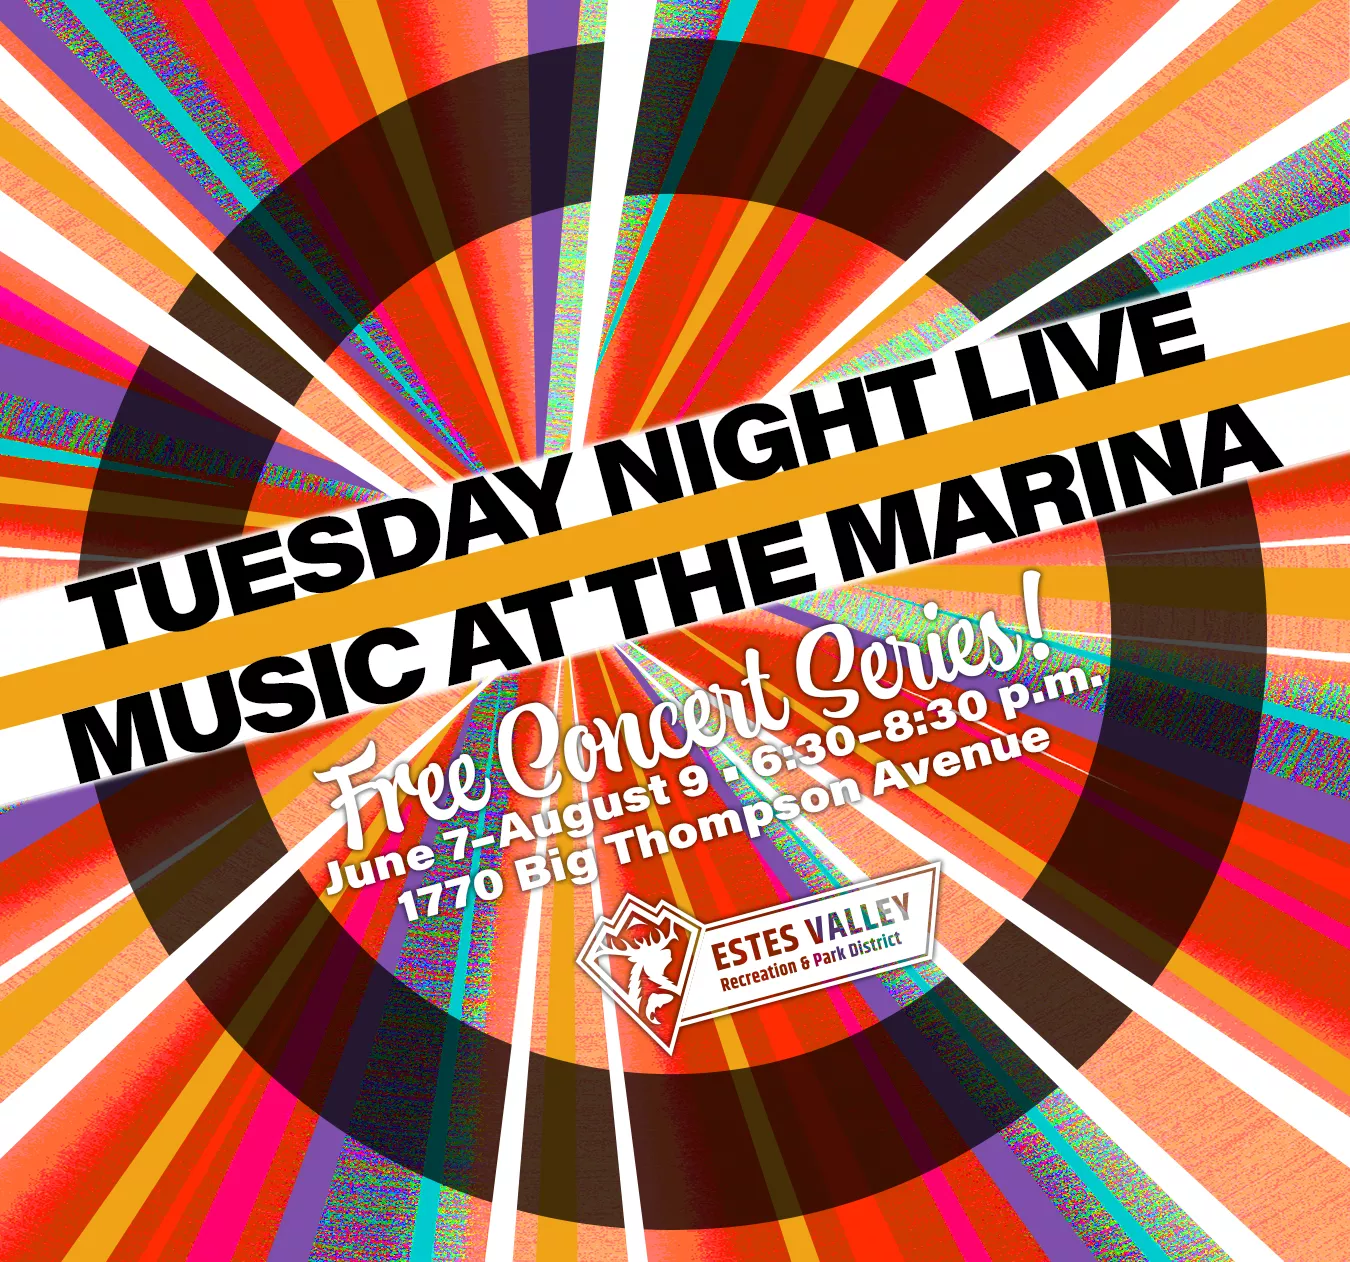 Tuesday Night Live concert series